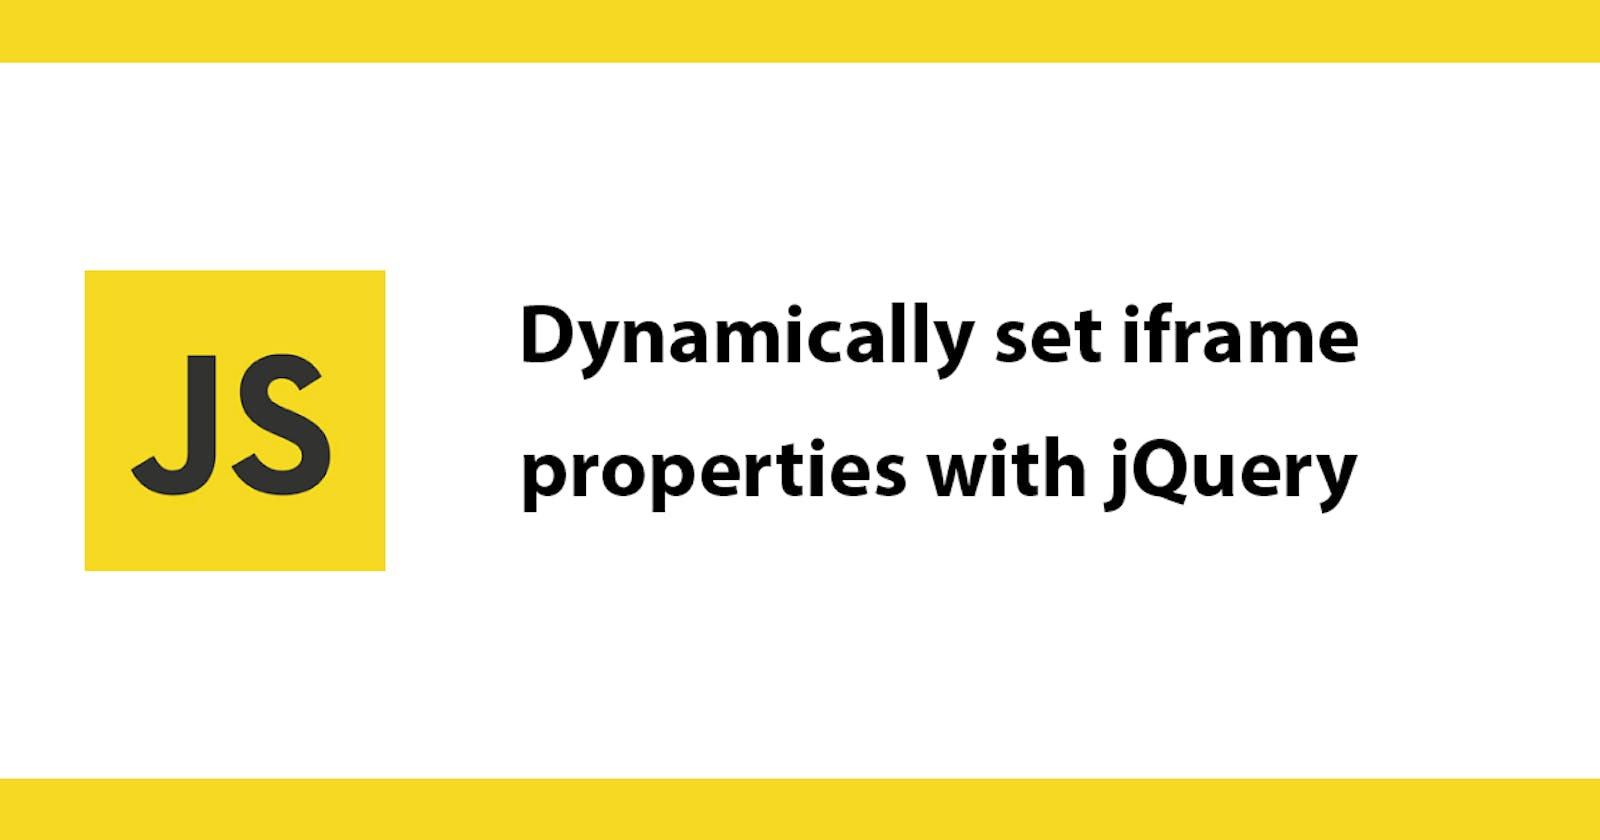 Dynamically set iframe properties with jQuery